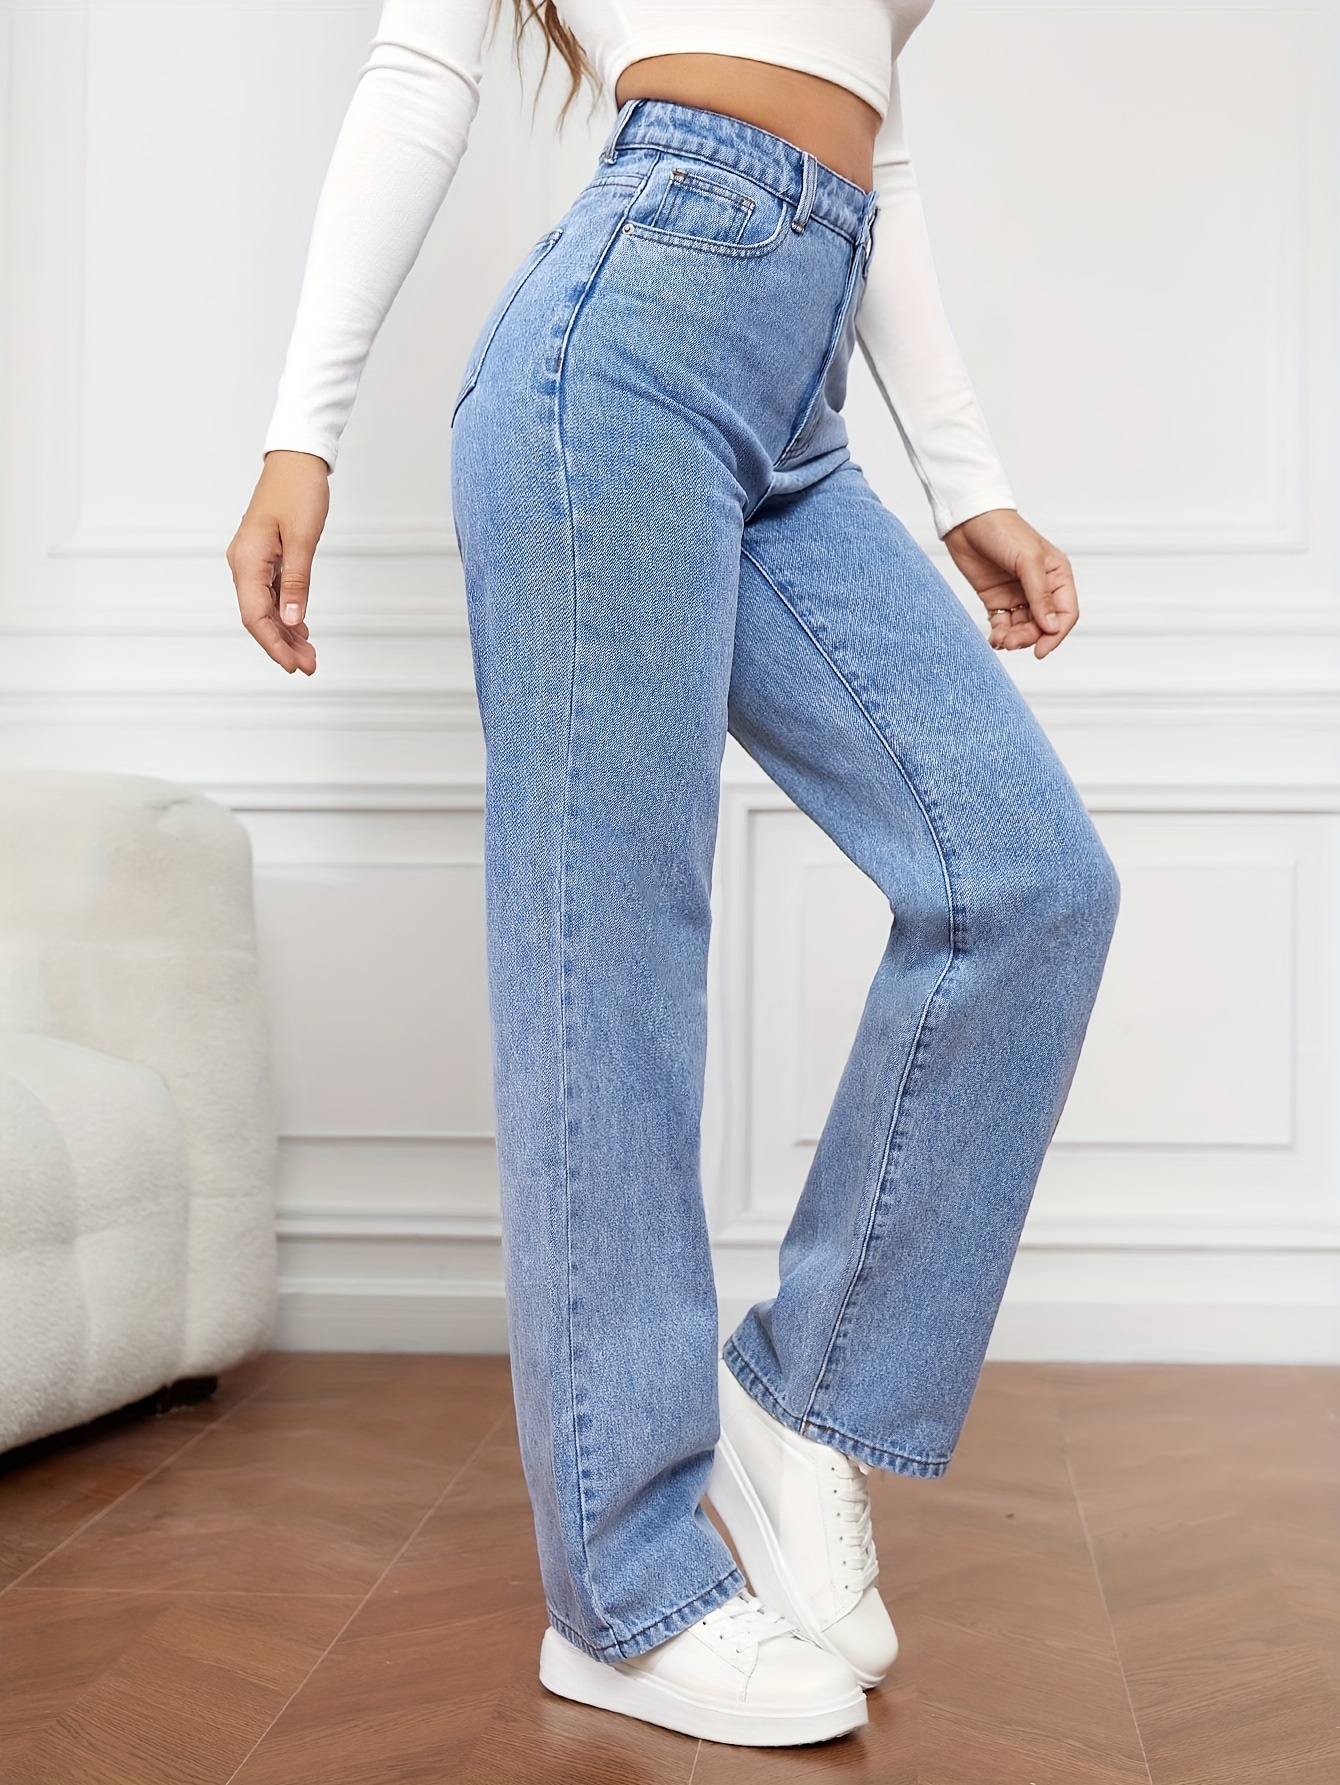 womens high waist washed jeans versatile straight leg pants casual style denim long trousers for daily wear details 5